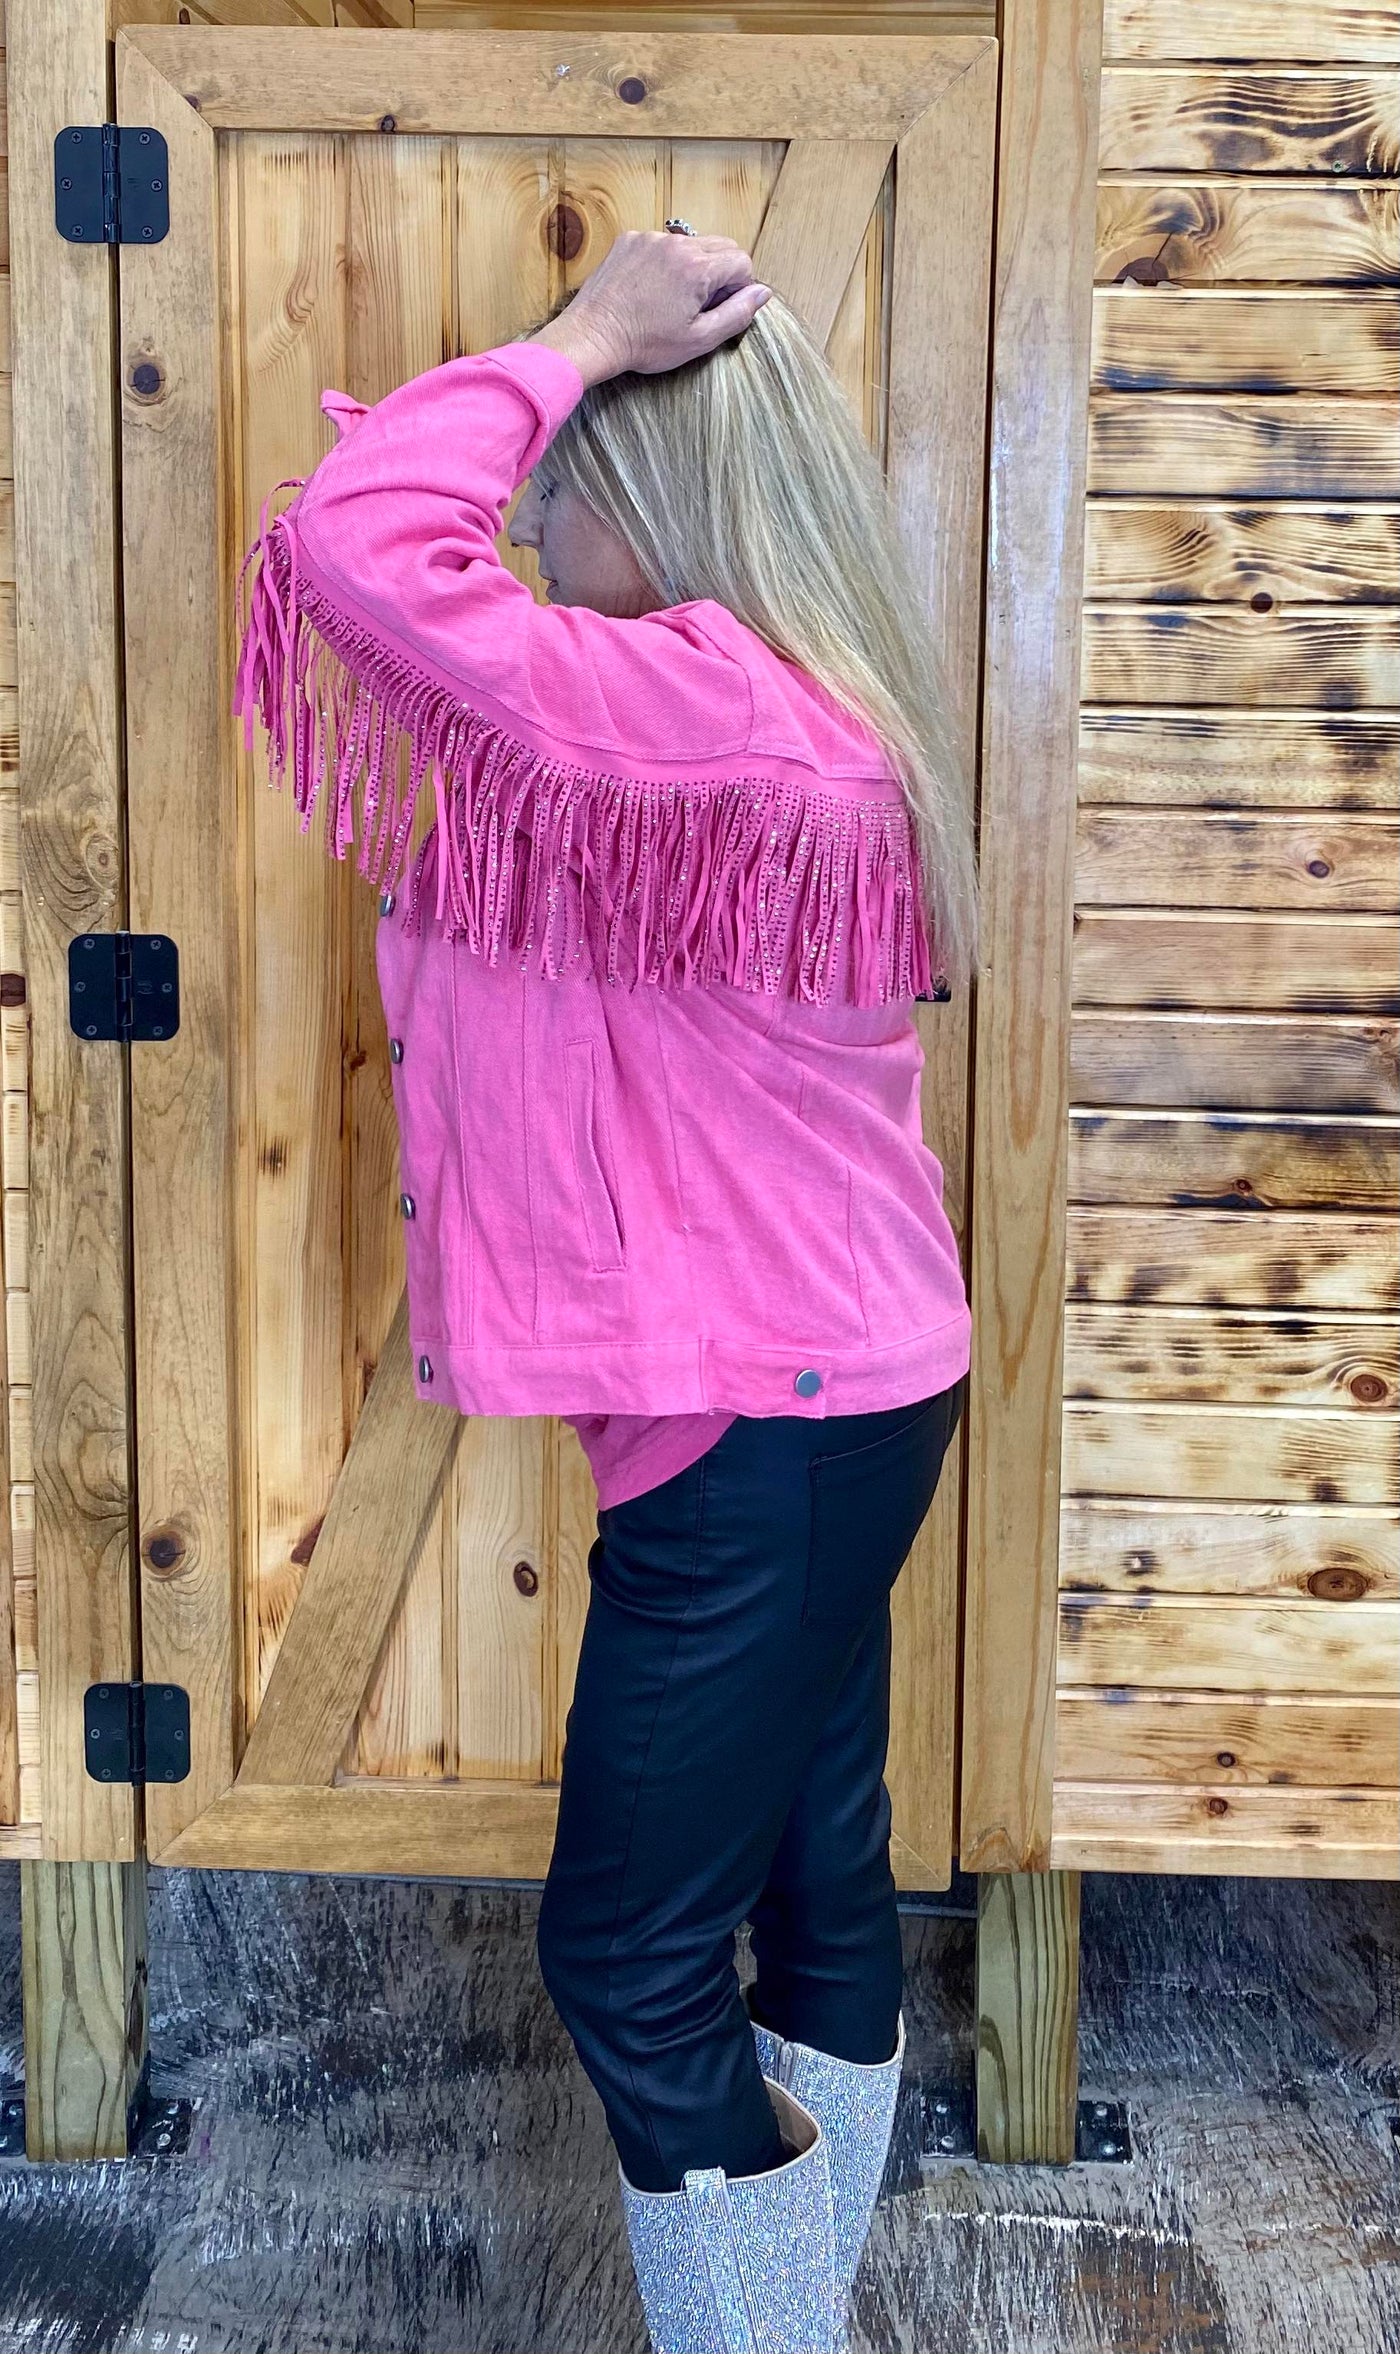 SALE- Hot Pink Denim Jacket With Fringe from Lucky & Blessed